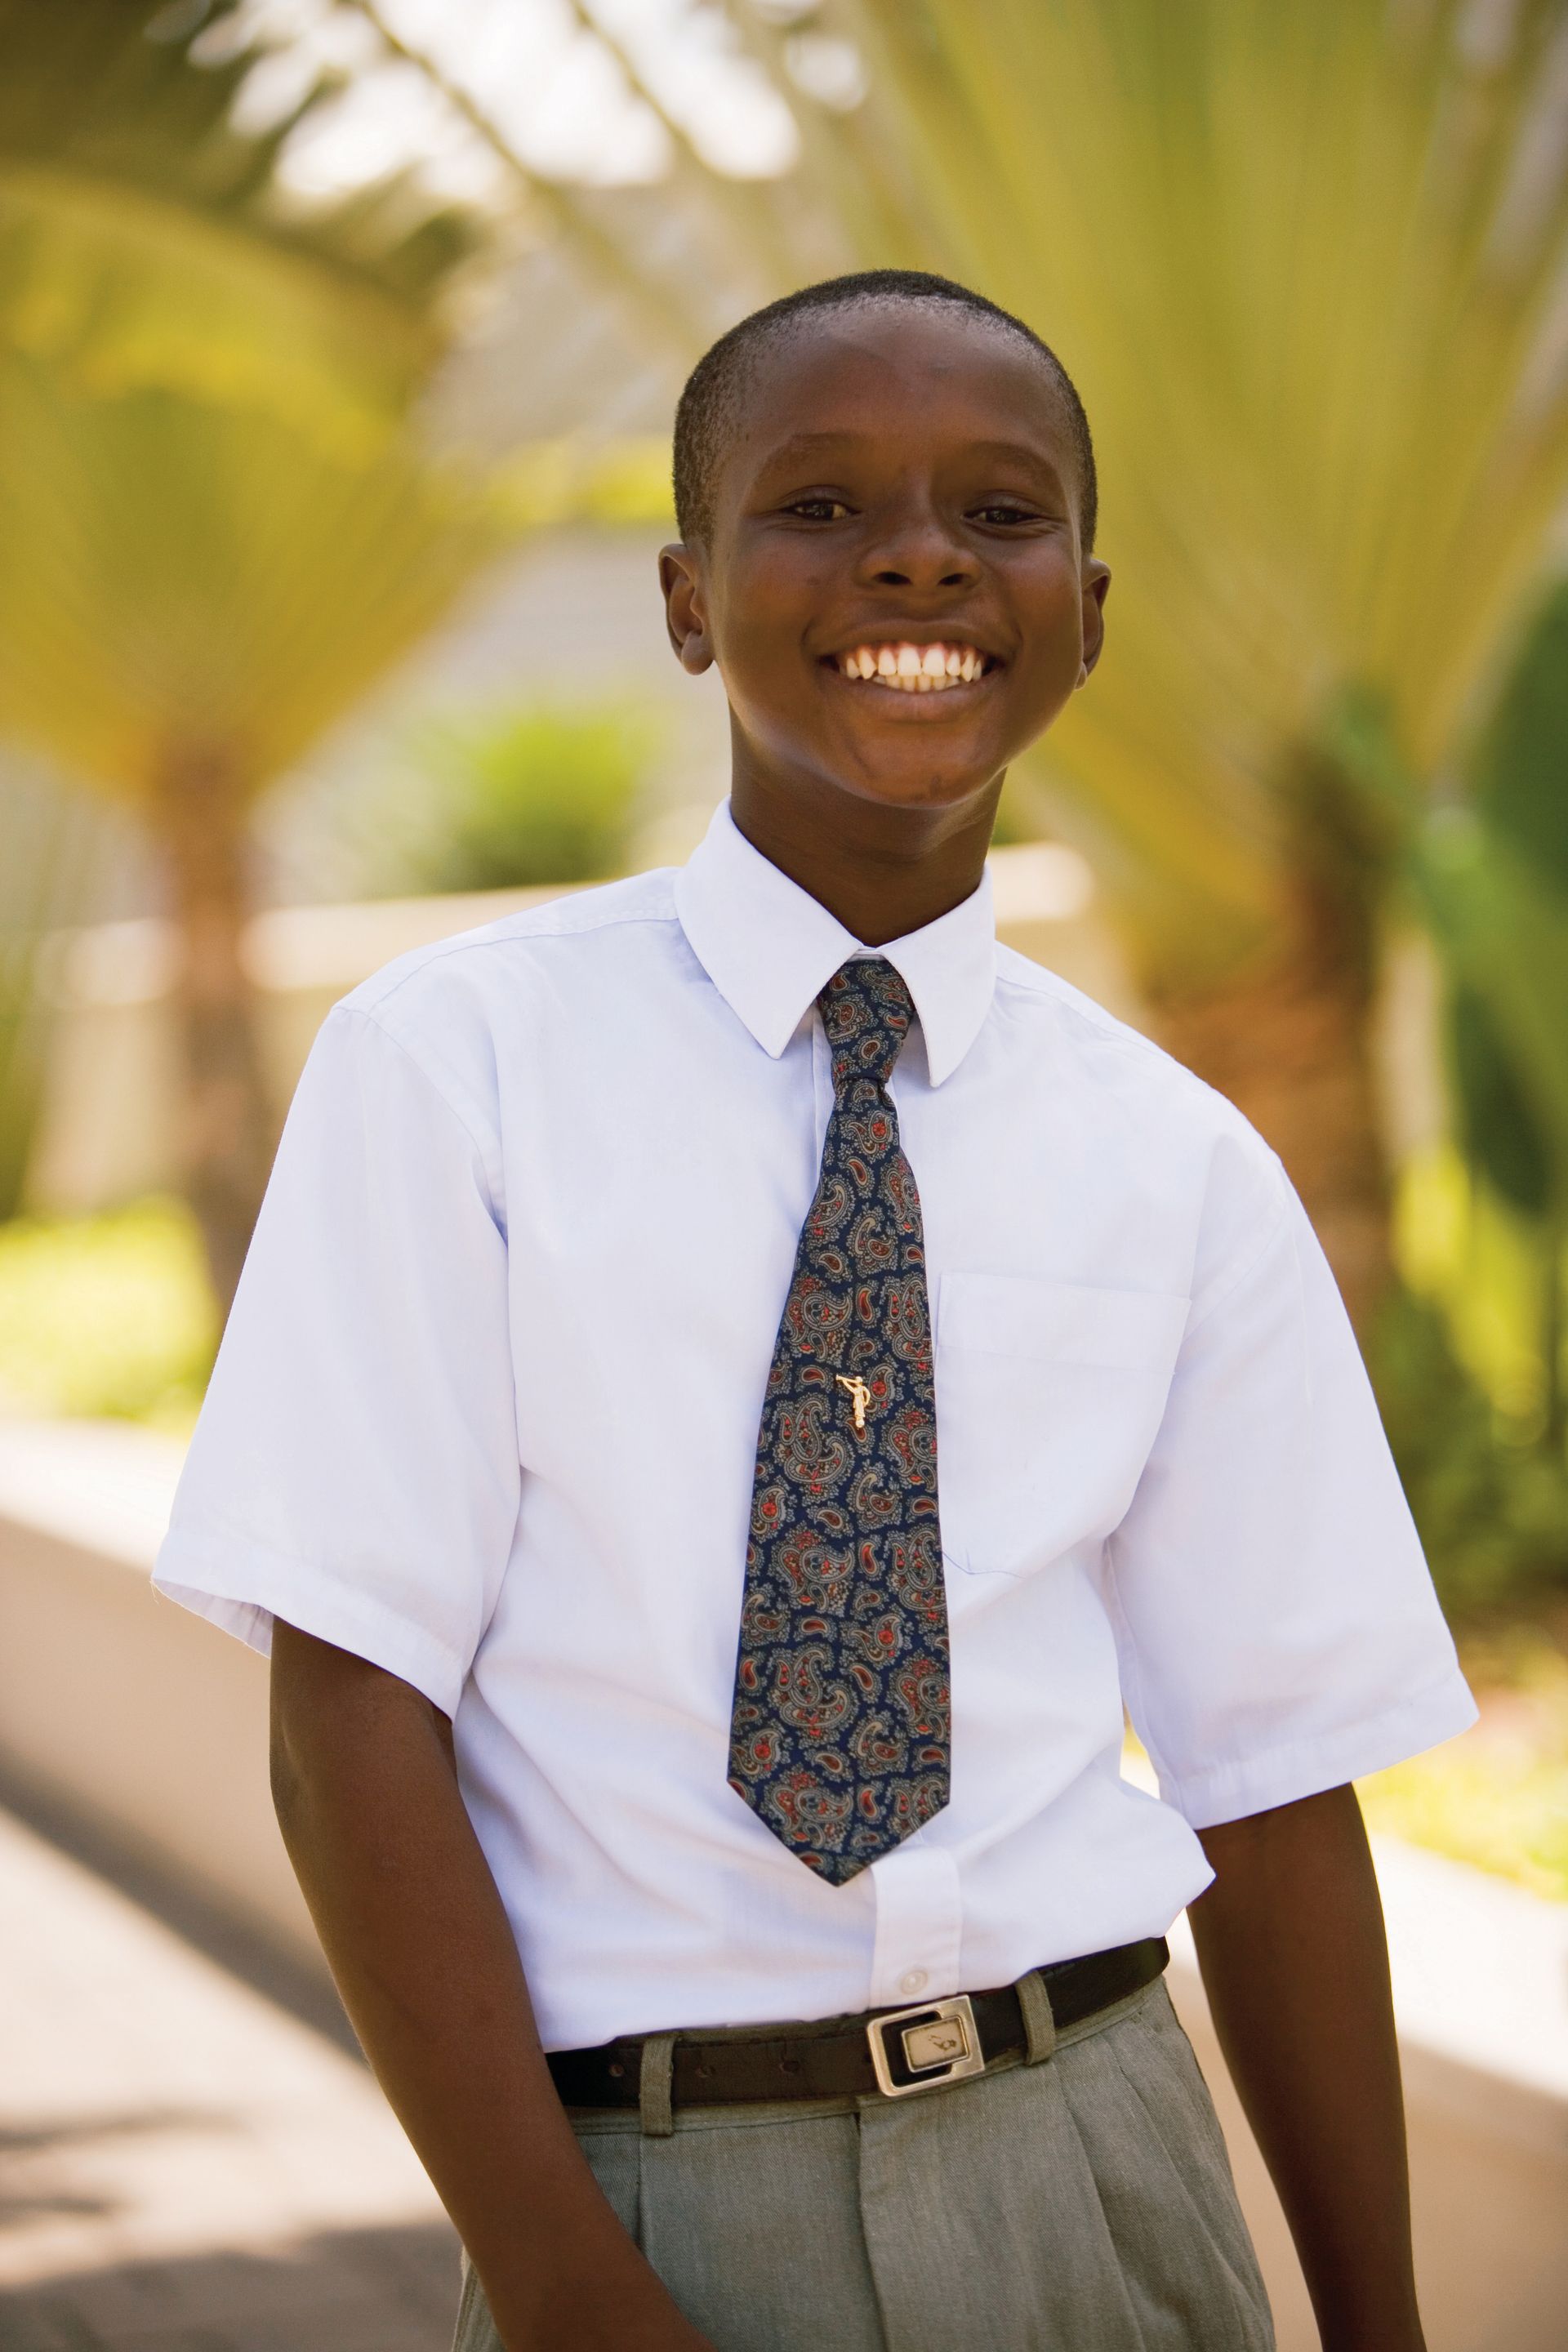 A portrait of a young man in Ghana, wearing a white shirt and tie, standing outside.